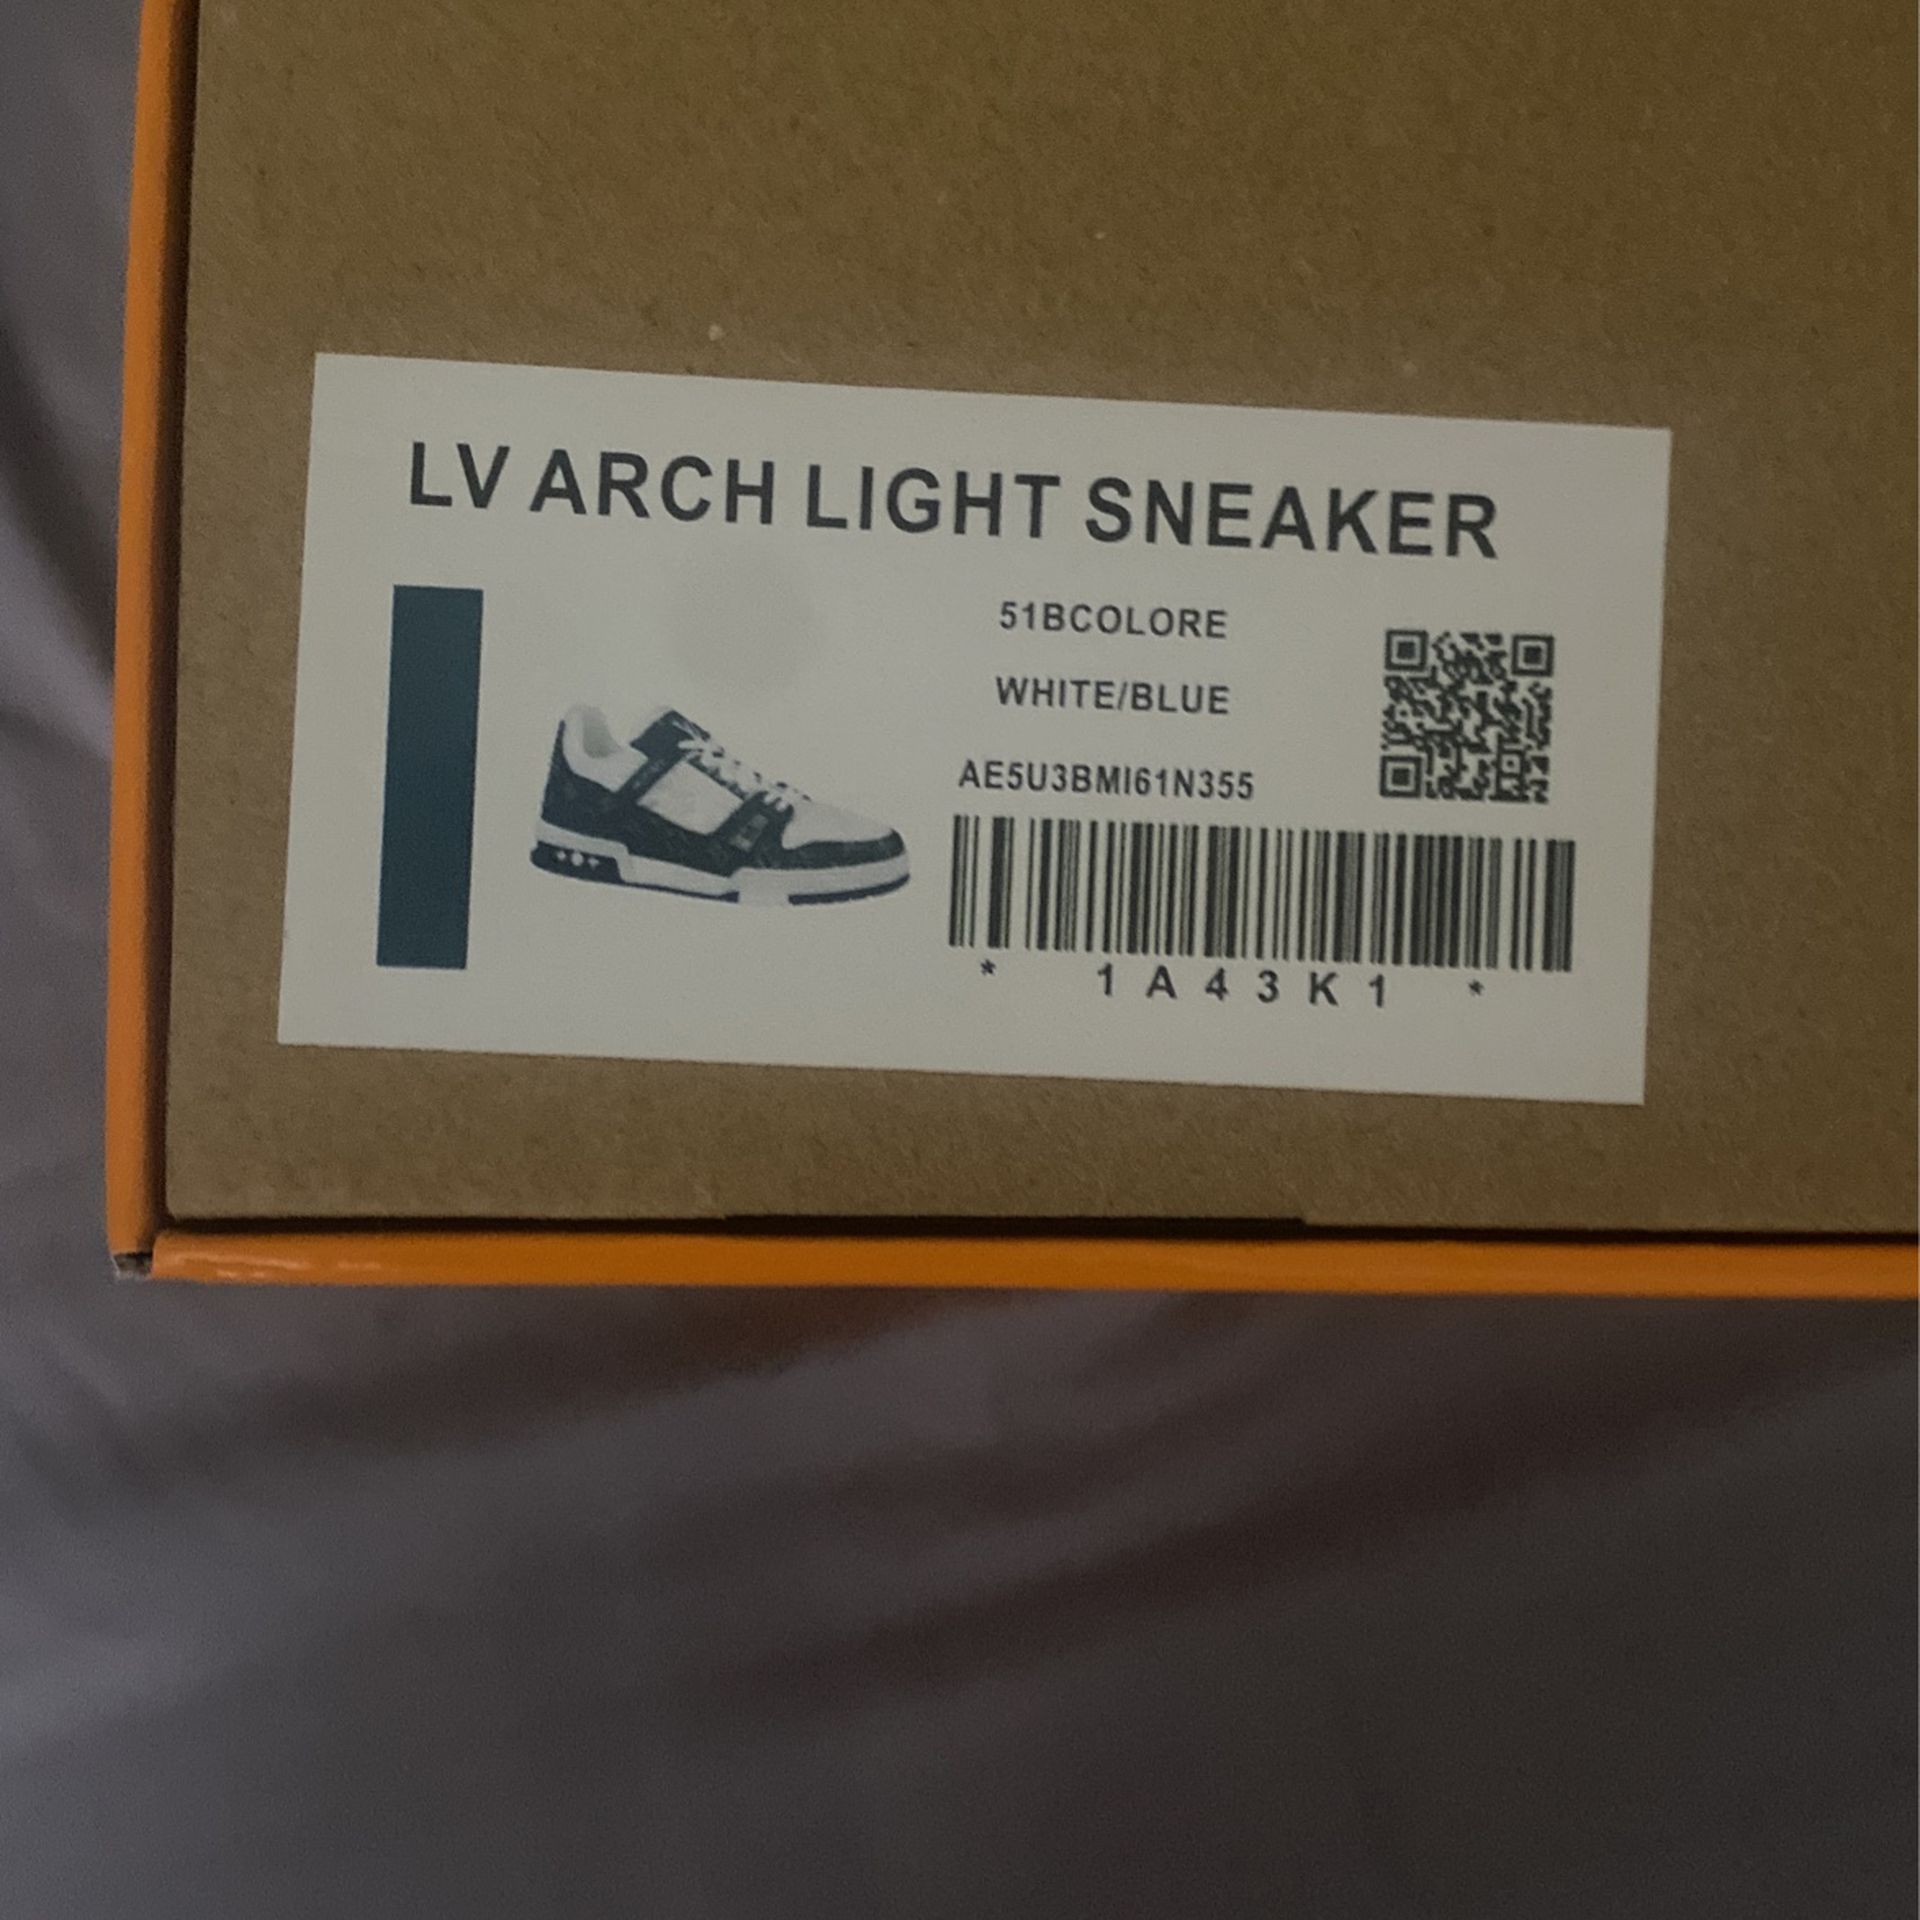 Louis Vuitton Lv Trainer Black Size 9 Pads for Sale in Aventura, FL -  OfferUp